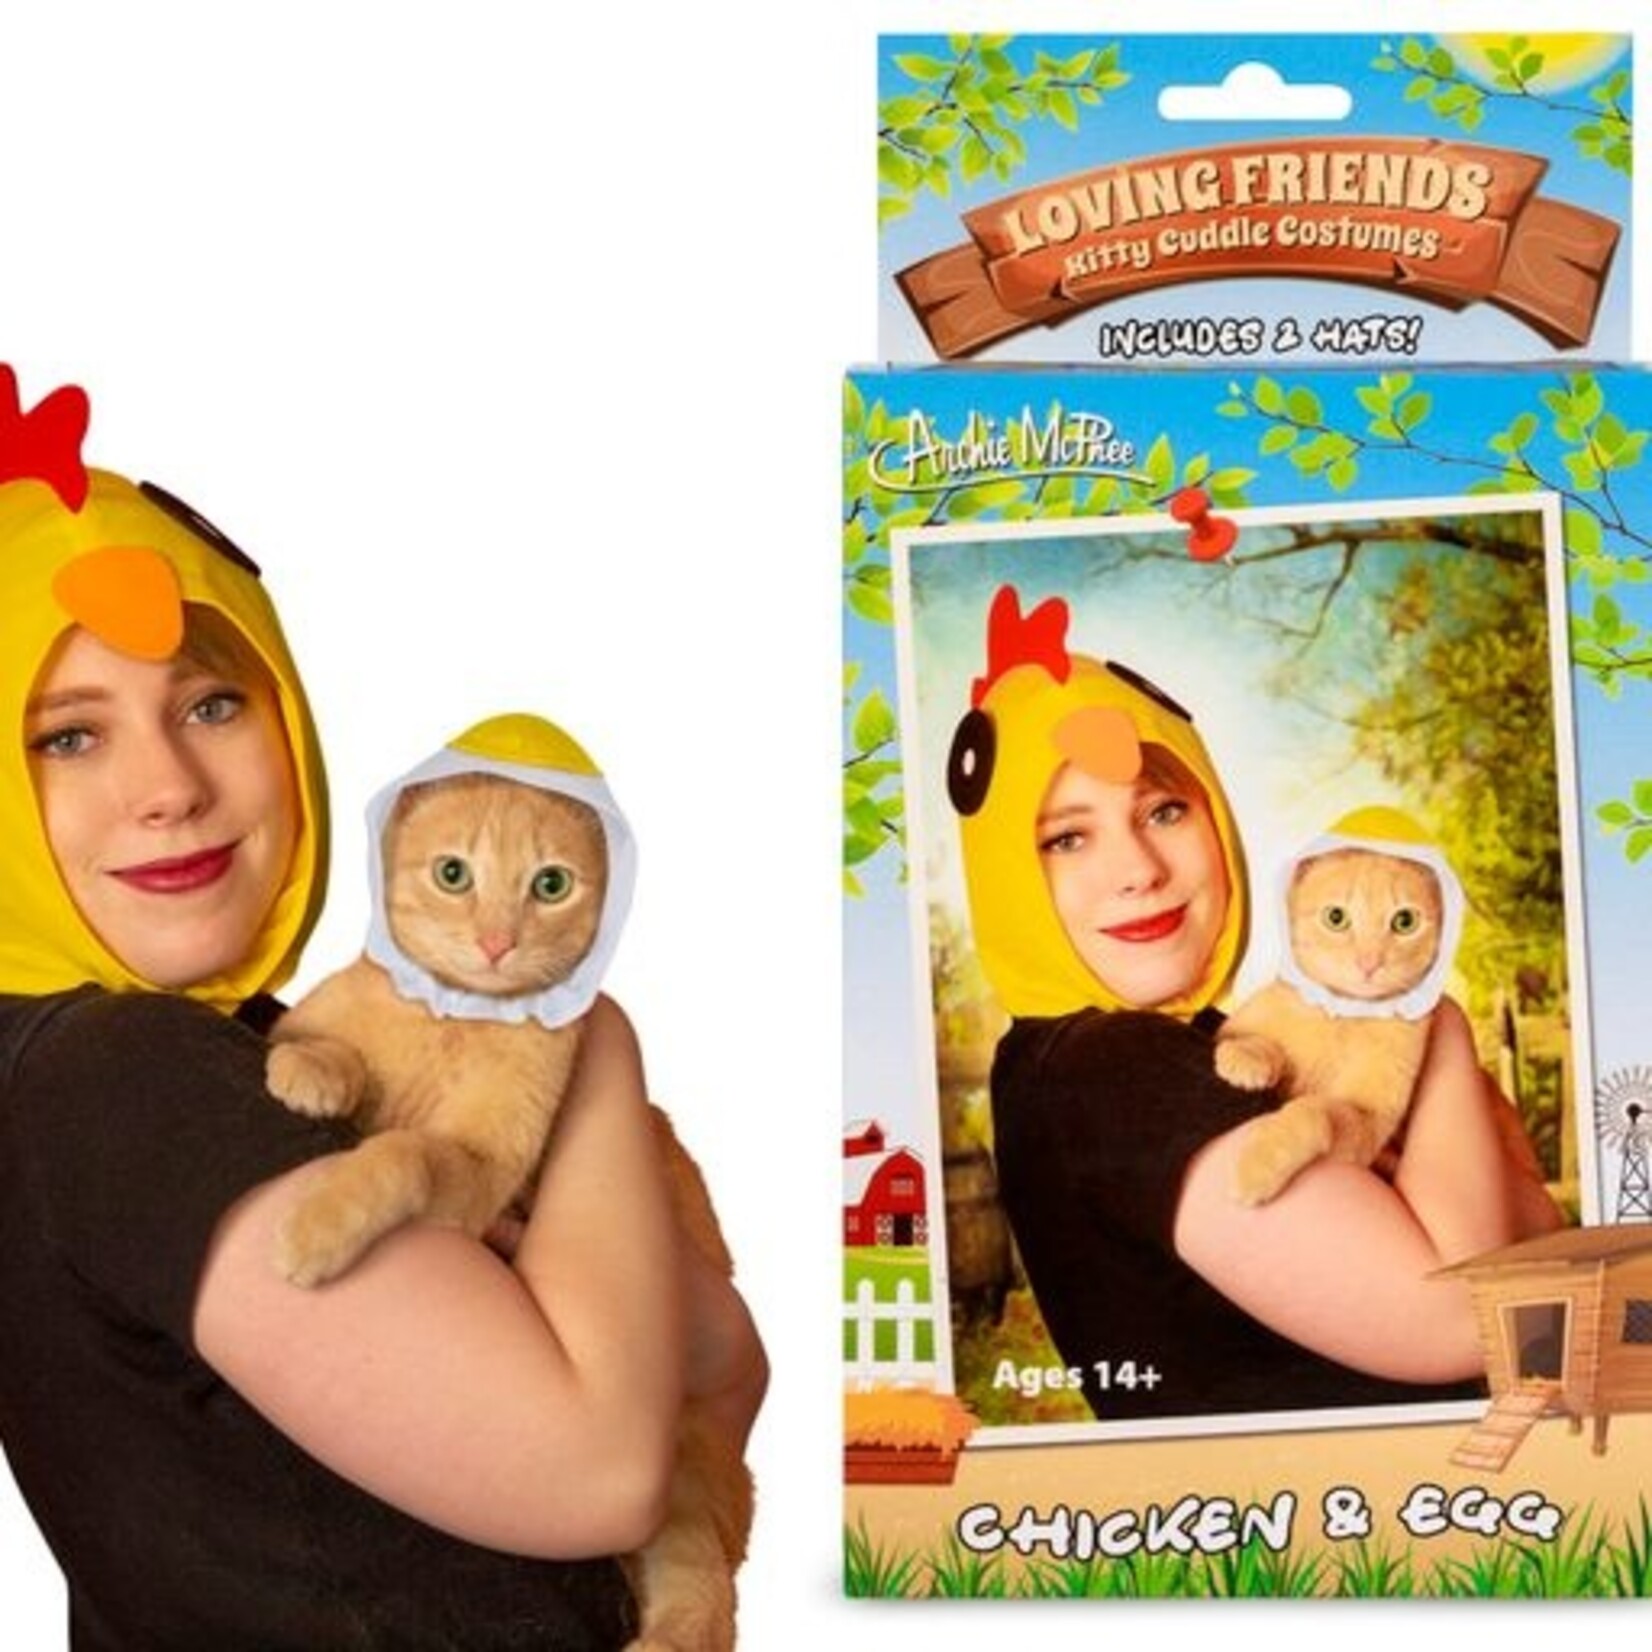 Accessories 12890 Loving Friends Kitty Cuddle Costumes:  Chicken & Egg